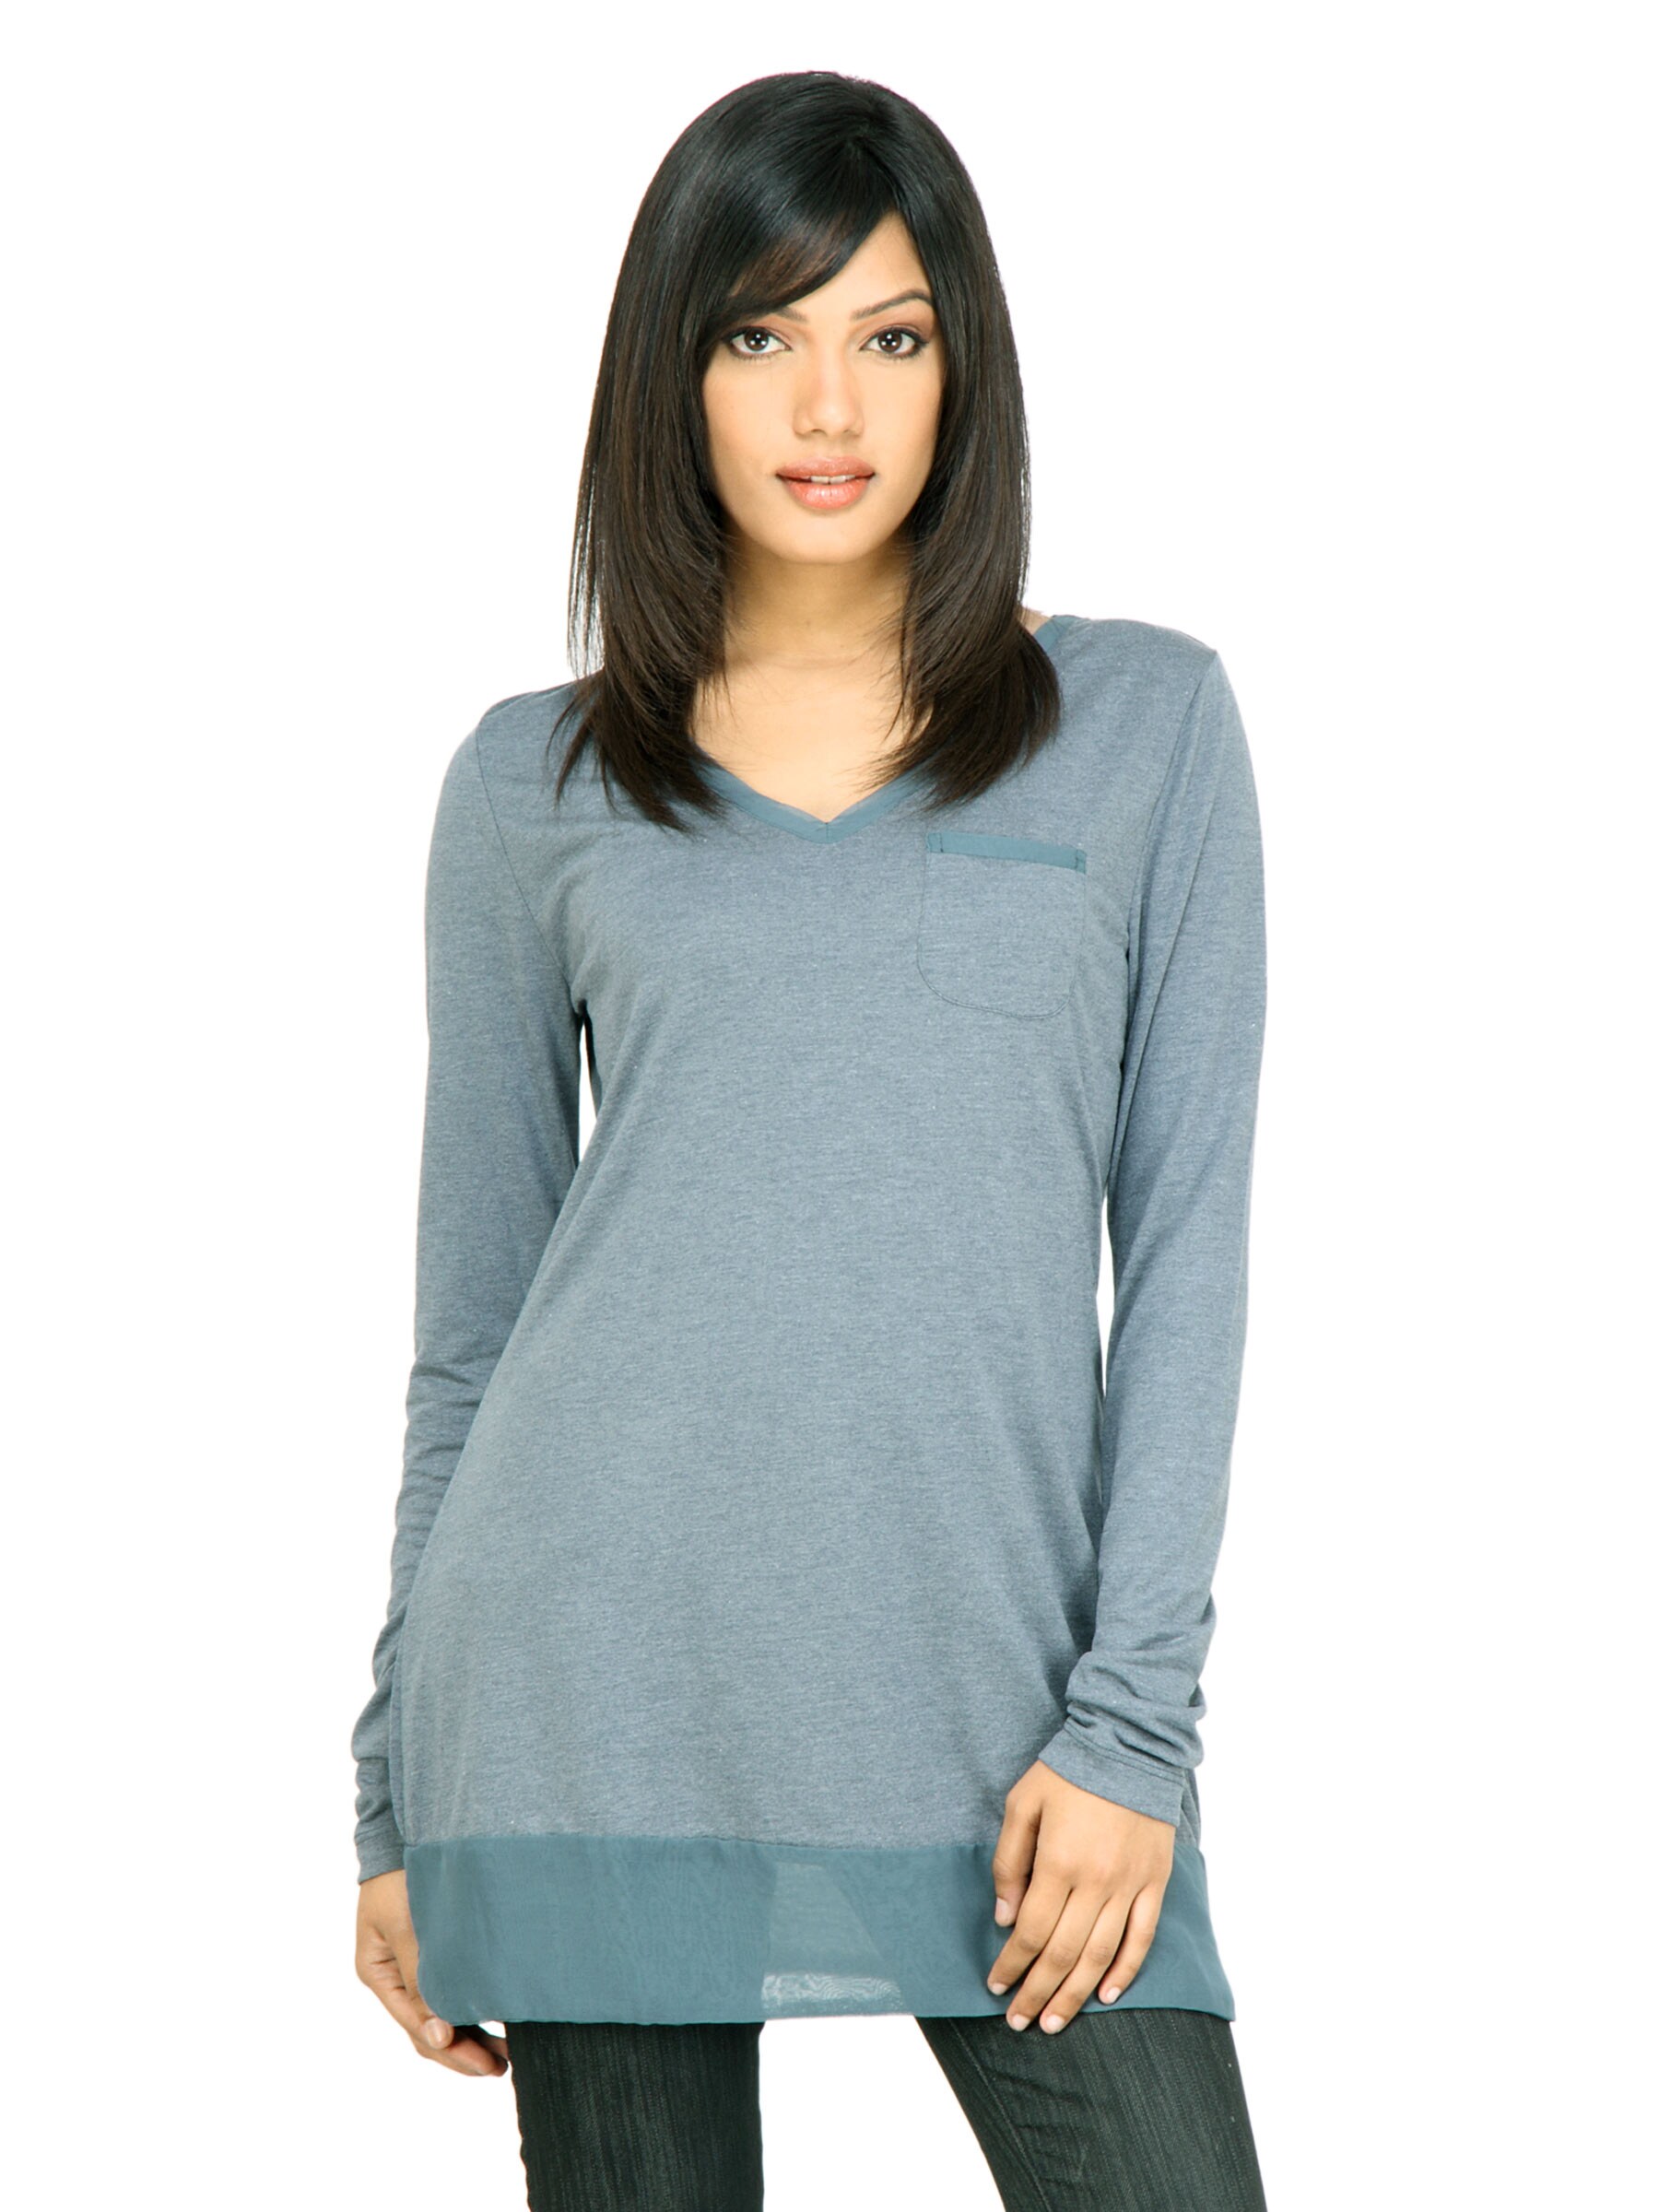 United Colors of Benetton Women Solid Grey Top